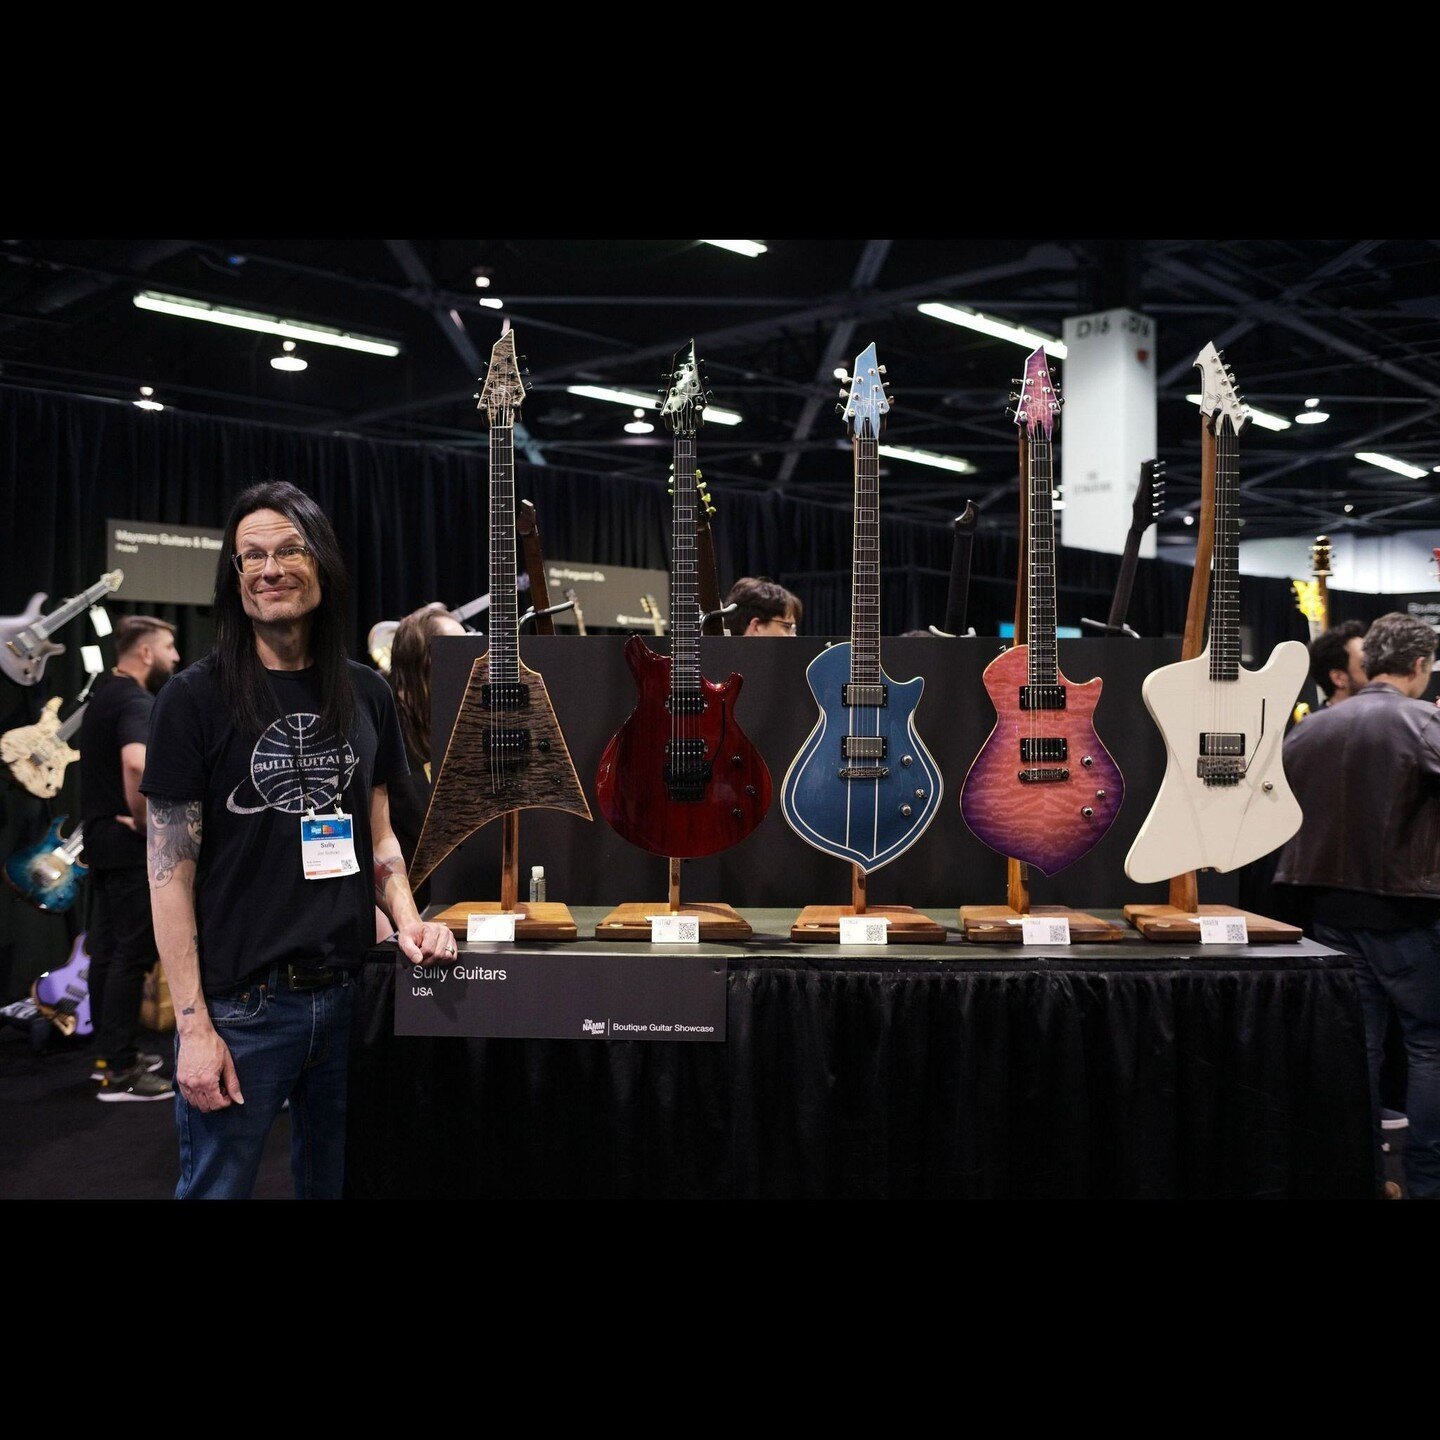 Just a fantastic time exhibiting at the @boutiqueguitarshowcase . Lots of very forward-thinking &amp; exciting builders, as well as guitarists looking for something a little different.

I received very positive feedback on these builds - which contai